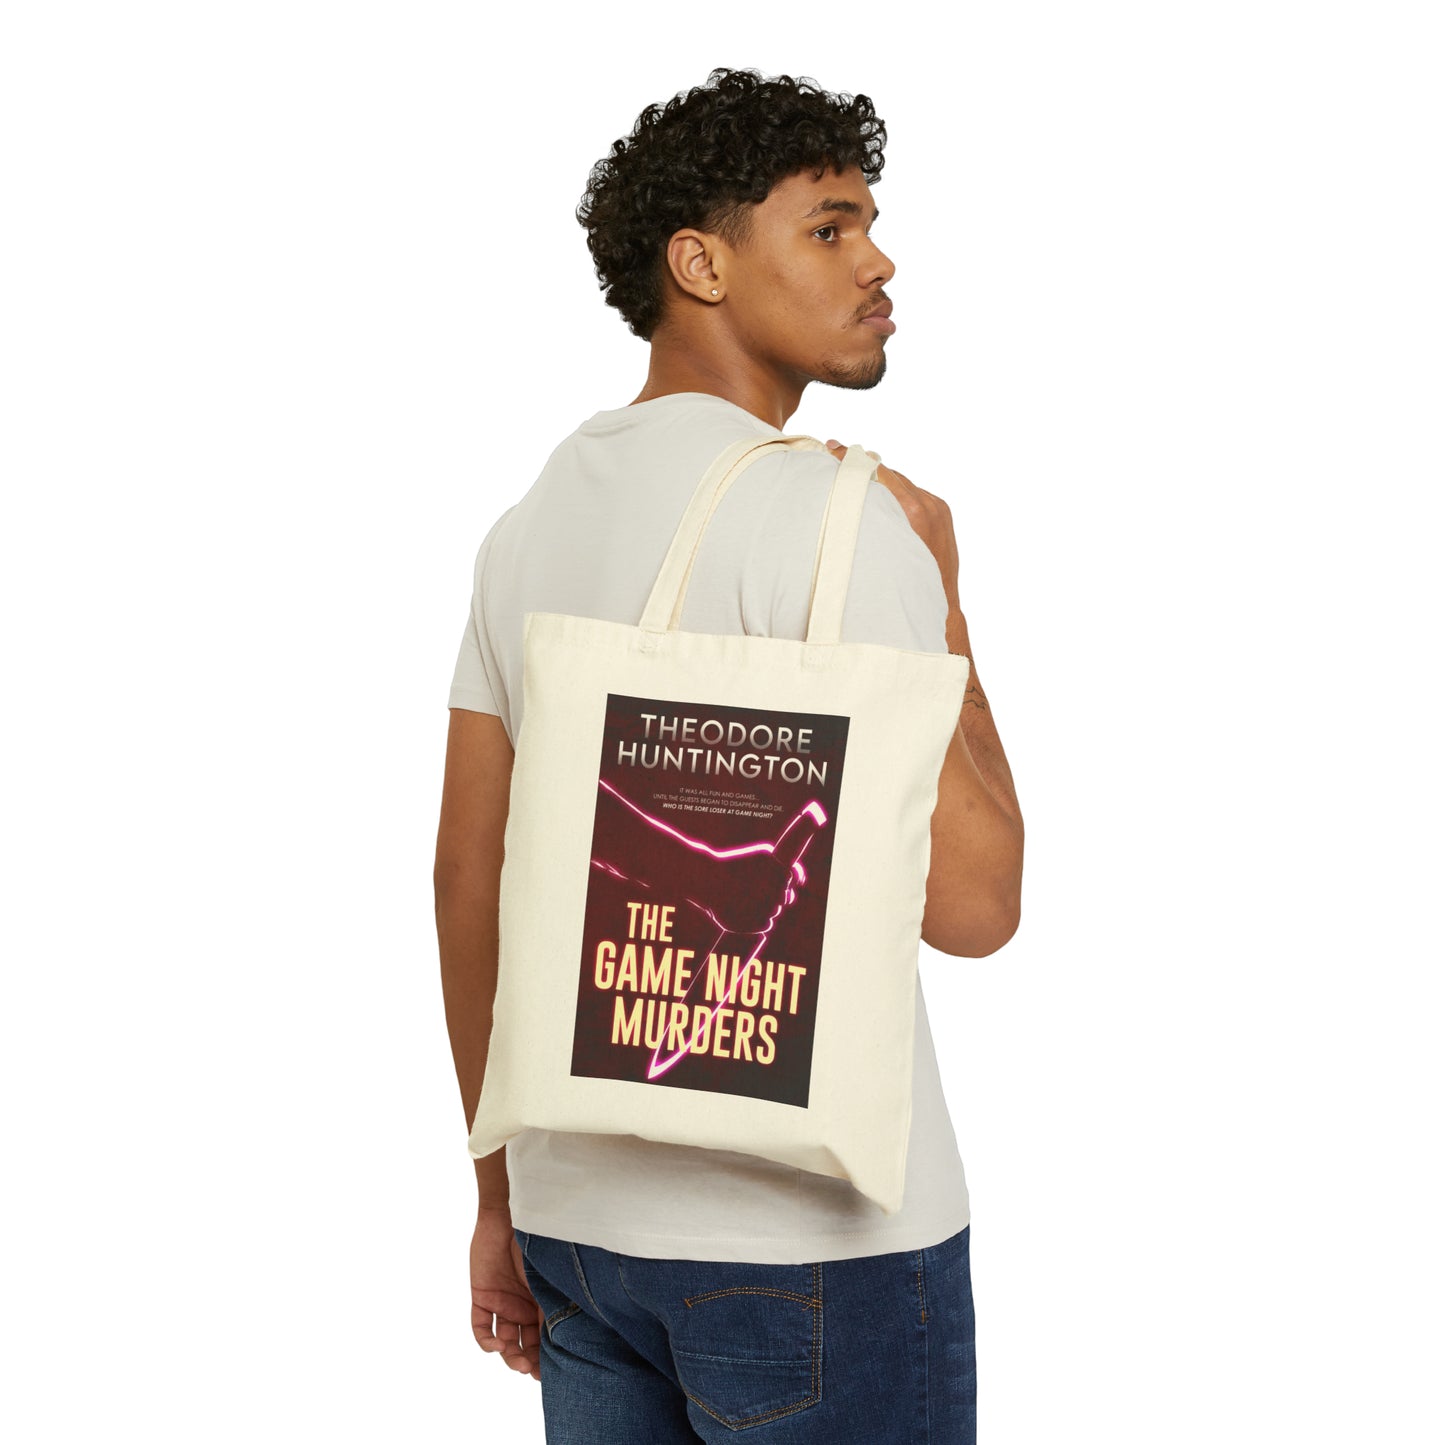 The Game Night Murders - Cotton Canvas Tote Bag